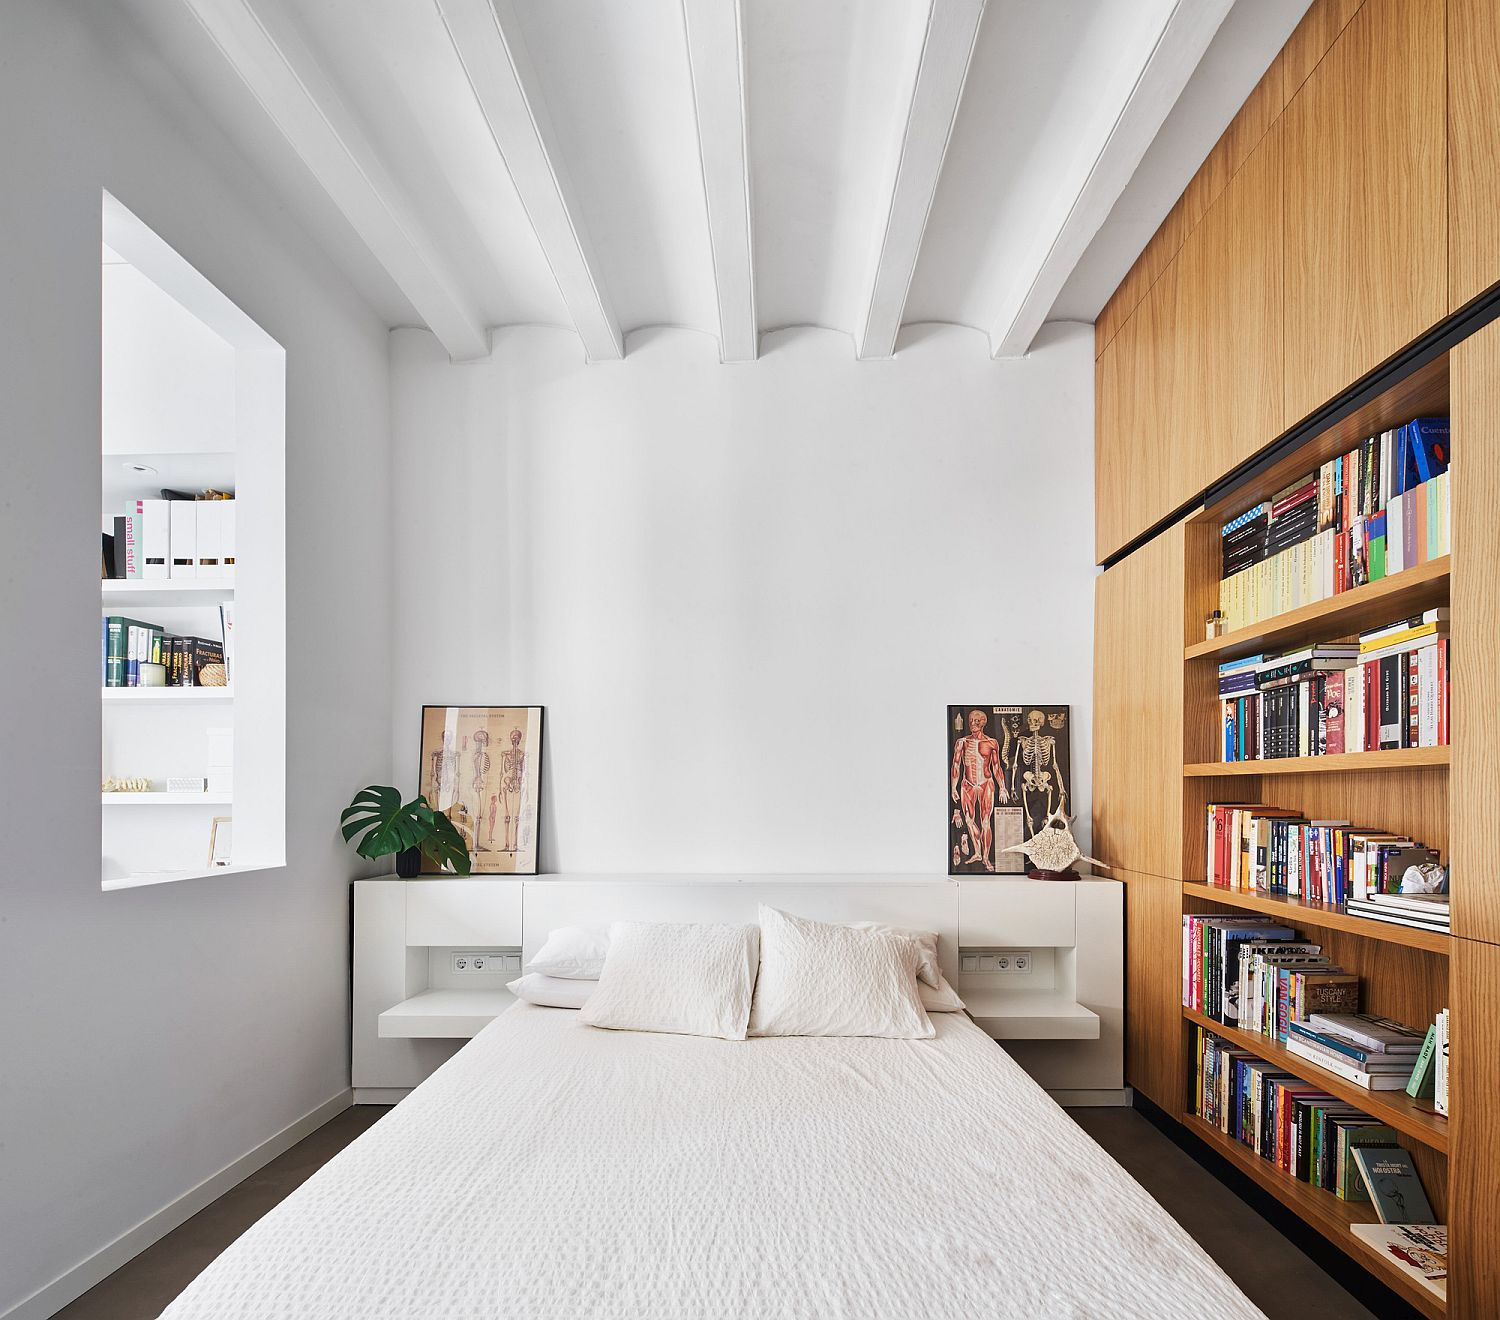 Custom Oak Units and Shelves Bring Freshness to this Revamped Barcelona Apartment